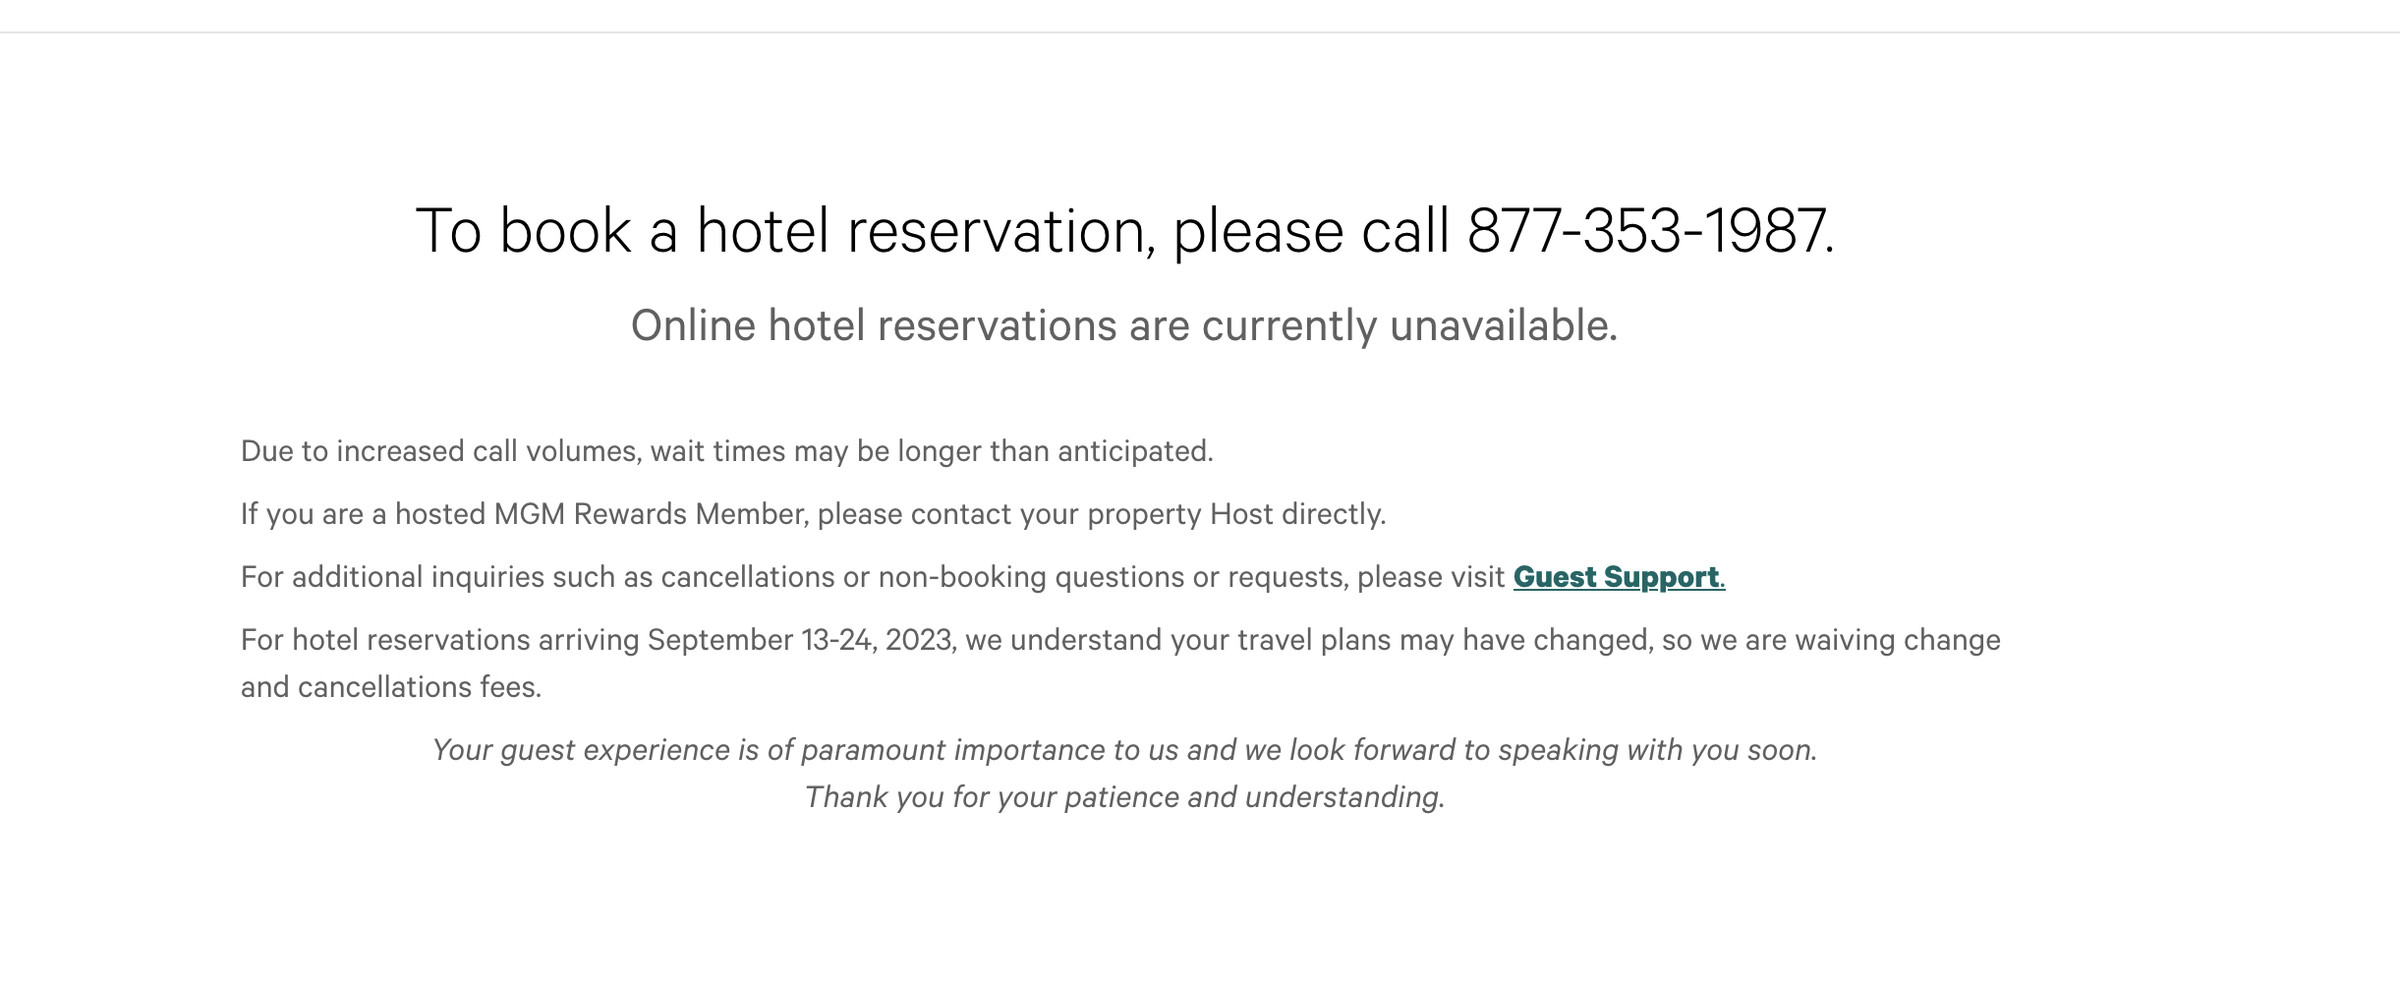 A screenshot of a website. The text reads: “To book a hotel reservation, please call 877-353-1987. Online hotel reservations are currently unavailable.&nbsp;Due to increased call volumes, wait times may be longer than anticipated. If you are a hosted MGM Rewards Member, please contact your property Host directly. For additional inquiries such as cancellations or non-booking questions or requests, please visit&nbsp;Guest Support.“